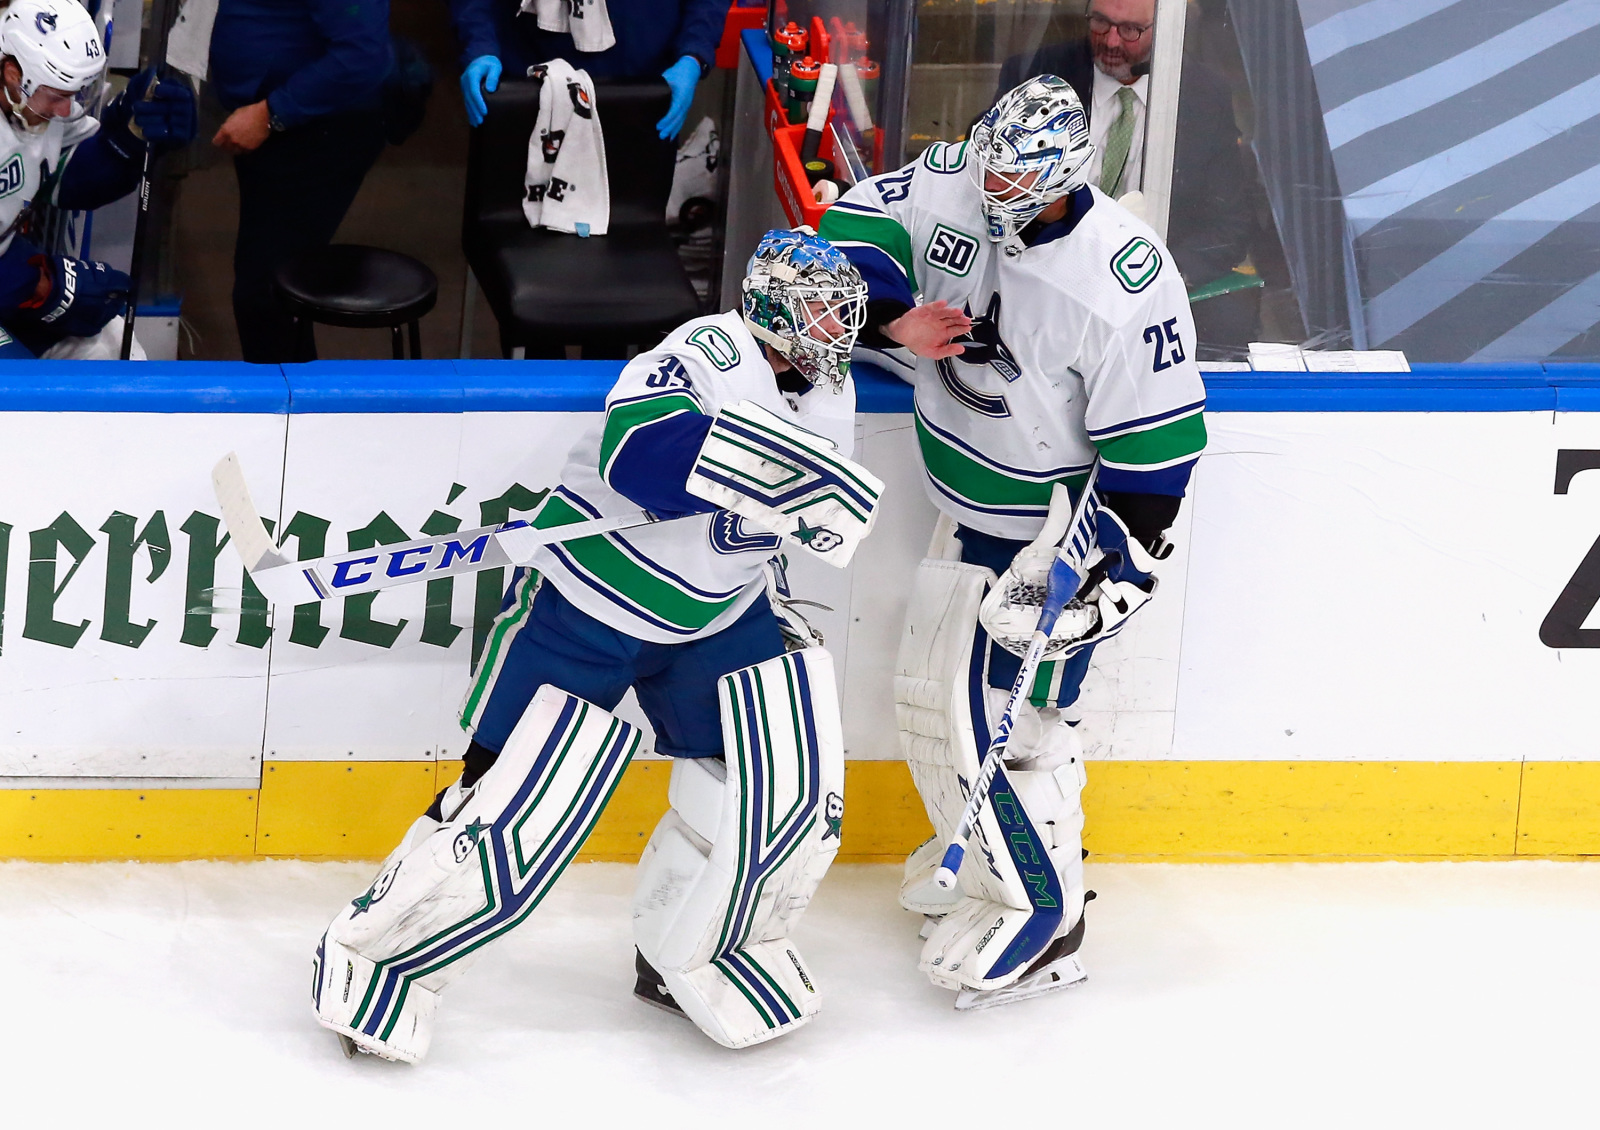 Jacob Markstrom made a gutsy, barehanded save to pull puck off